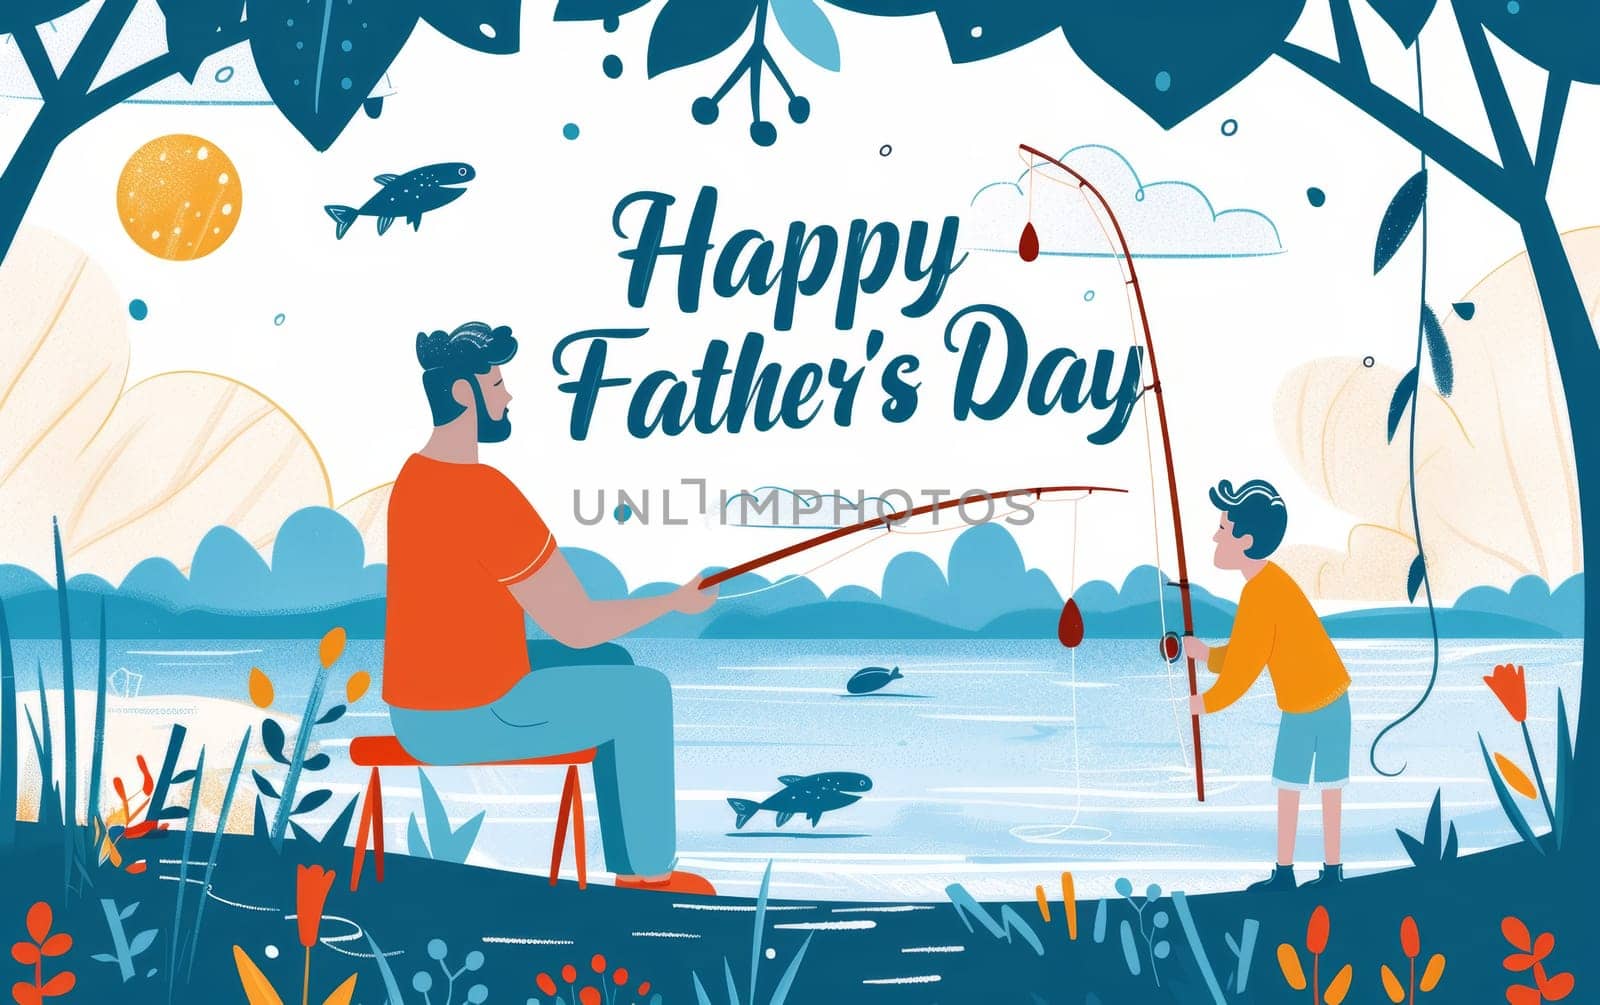 A whimsical illustration captures the bonding moment between a father and child while fishing under a starry sky on Fathers Day